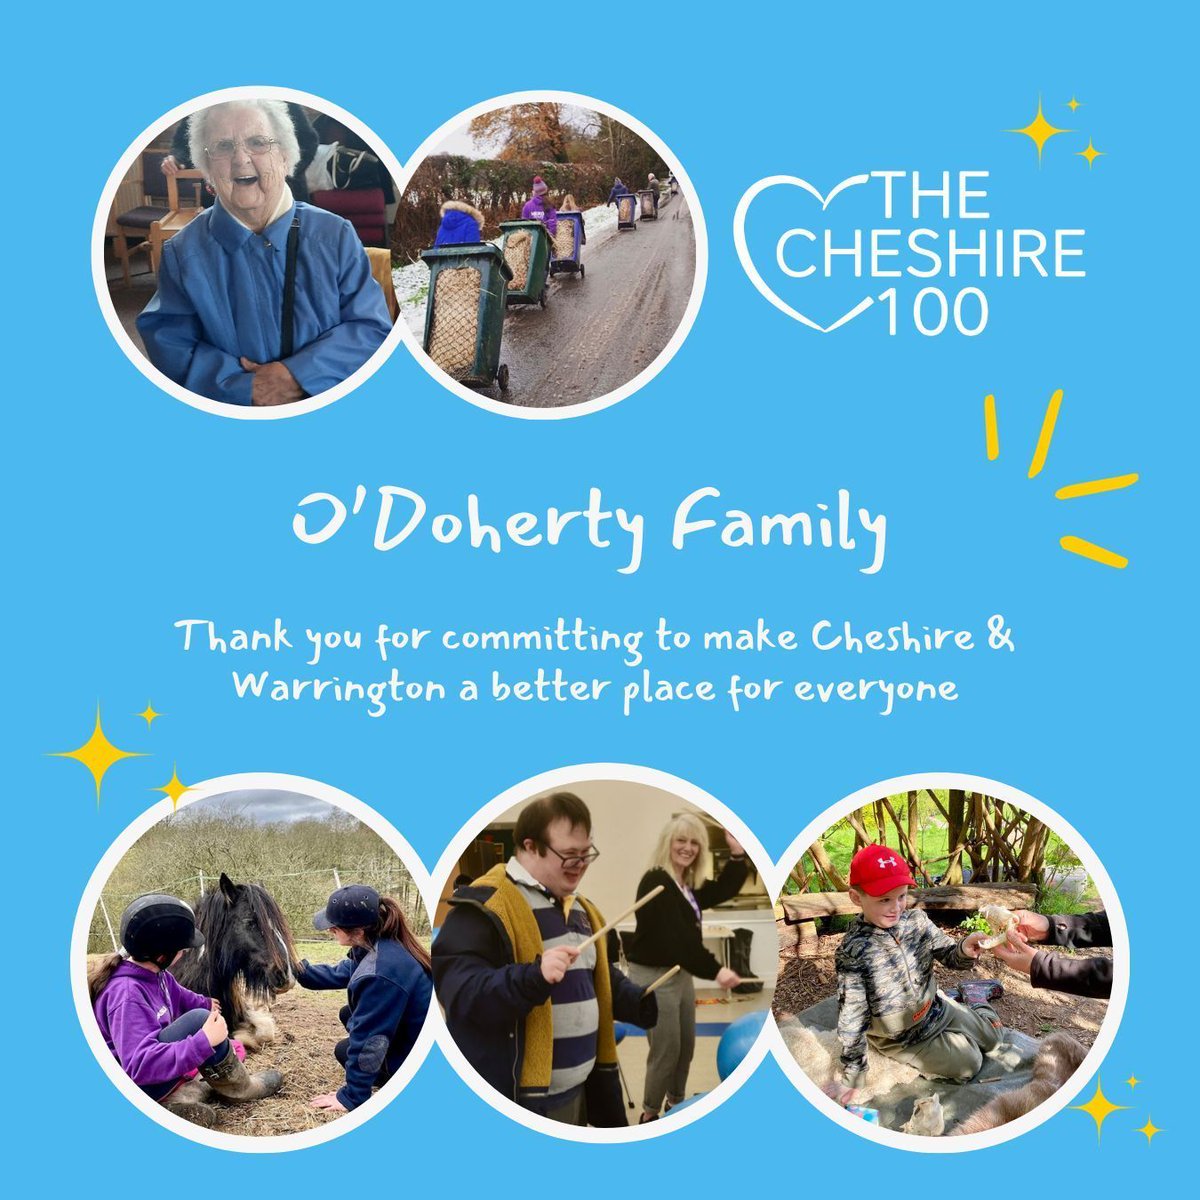 Thank you for renewing your Cheshire 100 membership 🙌 Our individual donors allow CCF to build a fairer, happier and stronger county for all! Want to find out more? buff.ly/3CREKEq #Cheshire